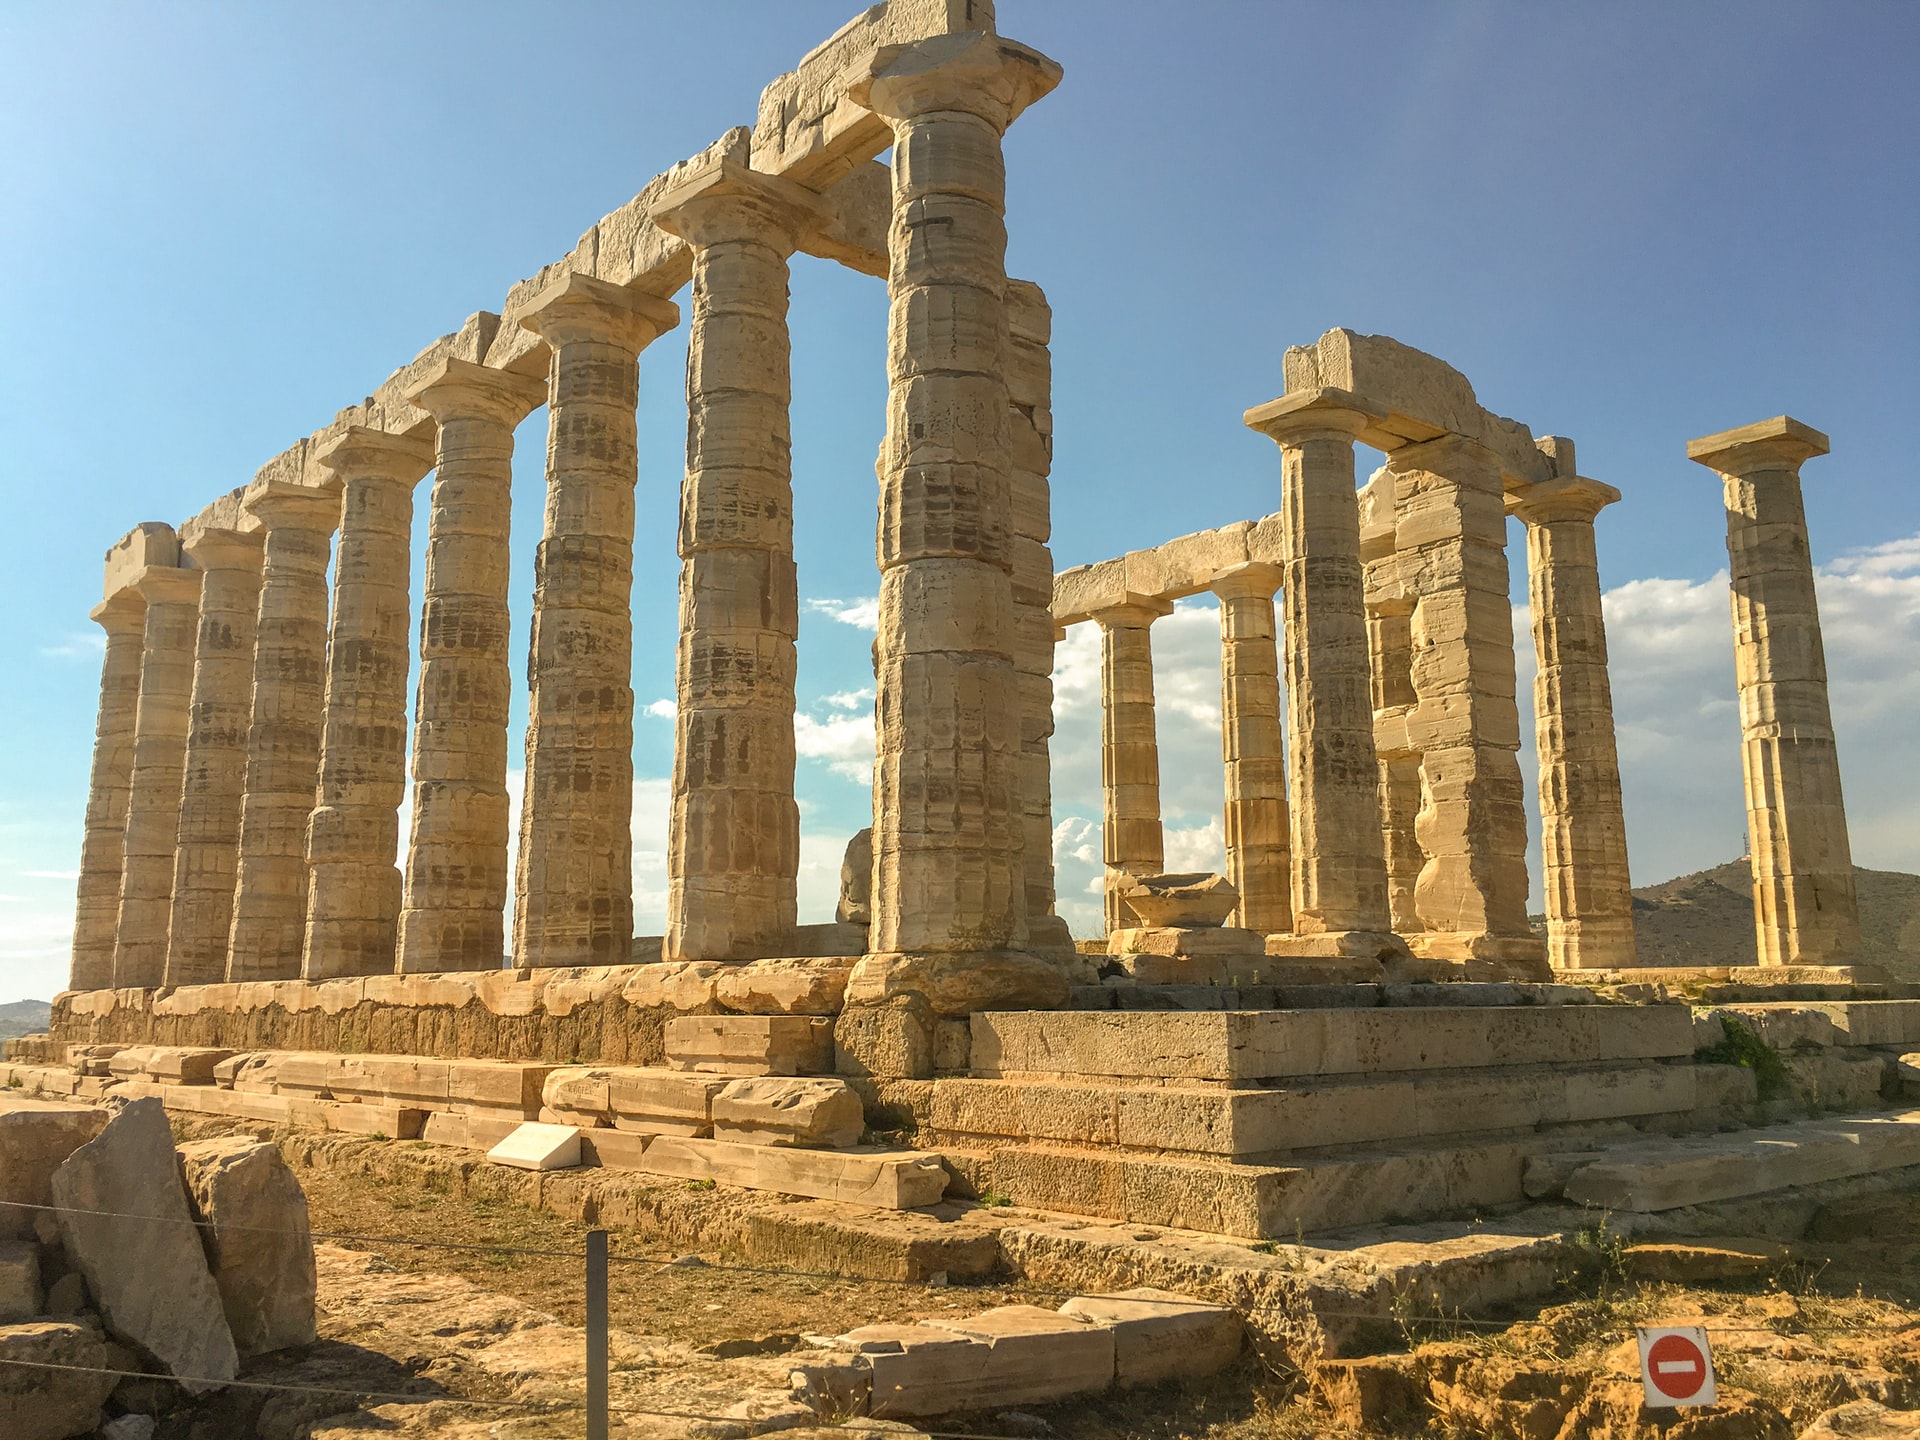 Cape Sounion and Temple of Poseidon Half-Day Small-Group Tour from Athens (Morning Tour)